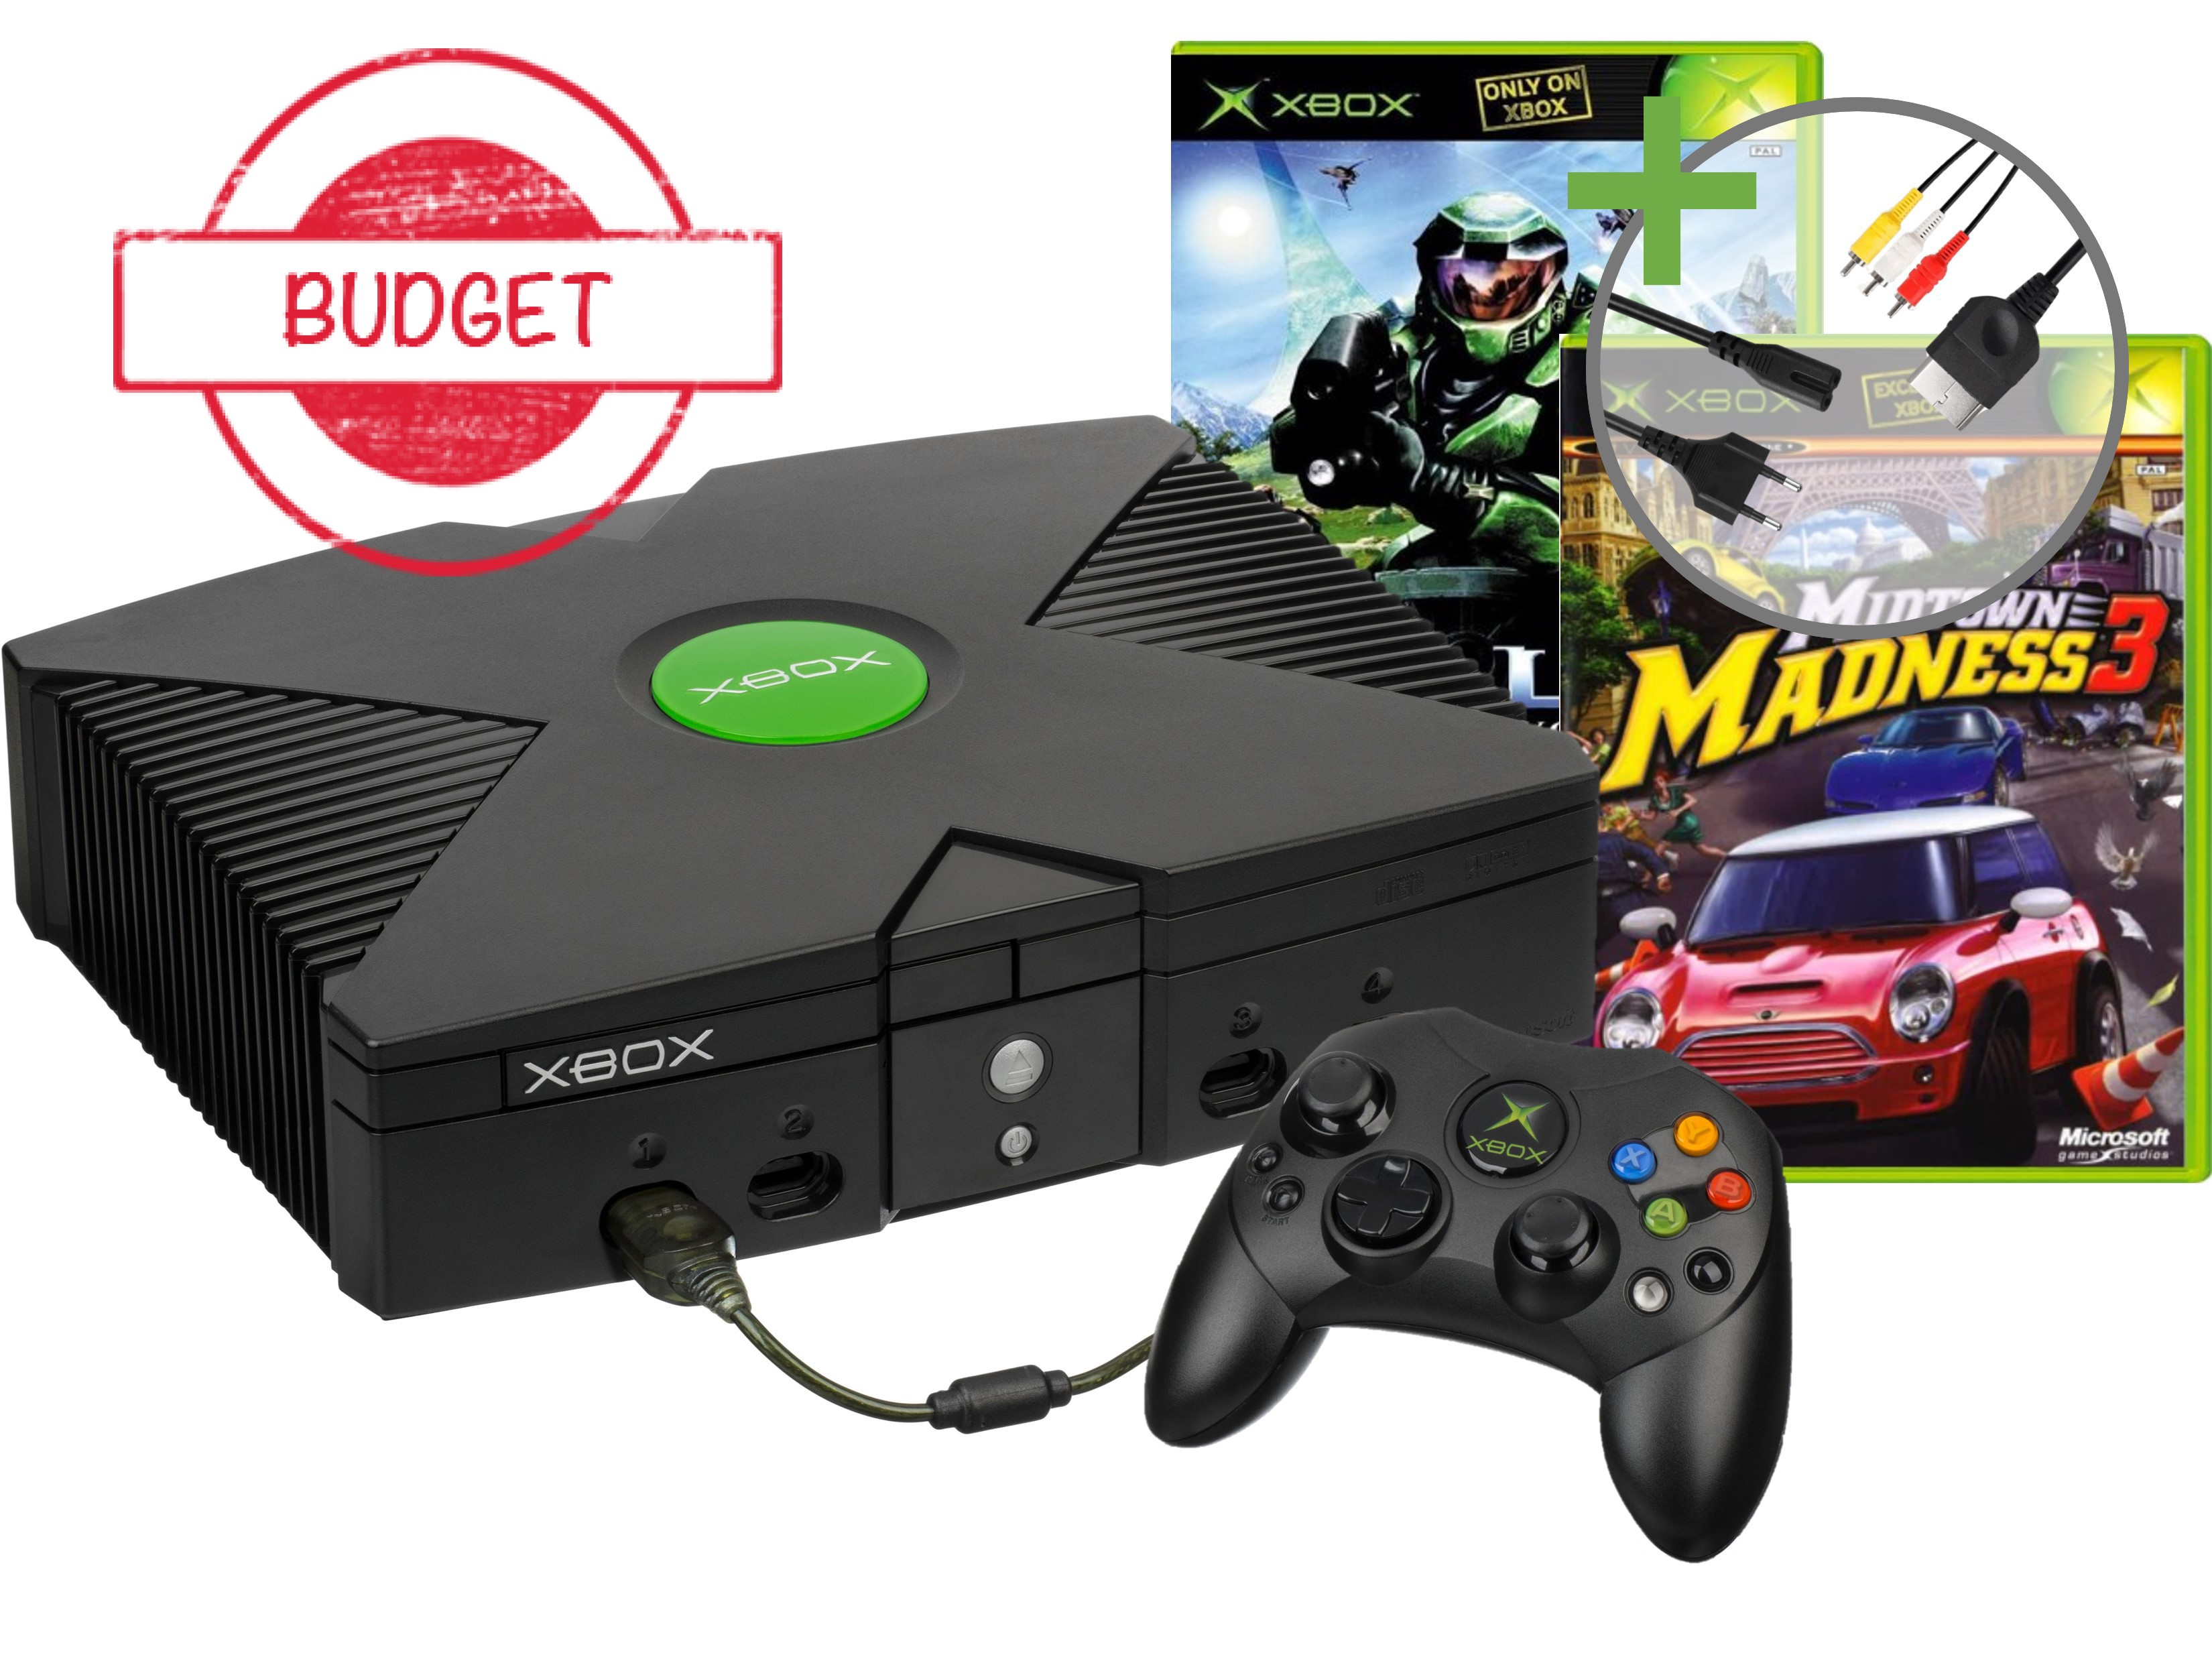 Microsoft Xbox Classic Starter Pack - Halo and Midtown Madness 3 Edition - Budget - Xbox Original Hardware